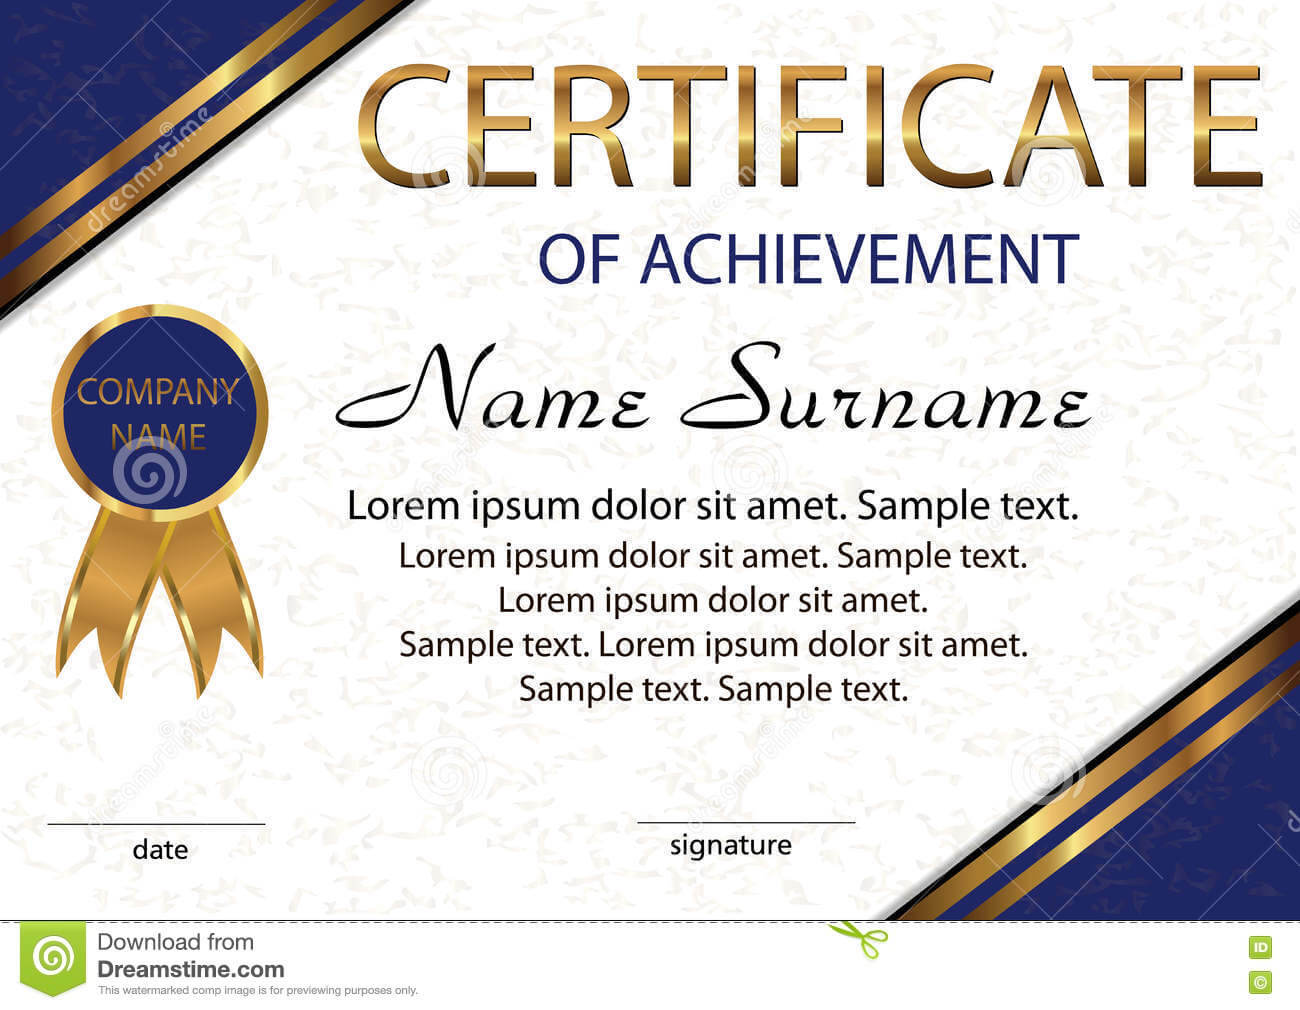 Certificate Of Achievement Or Diploma. Elegant Light Throughout Certificate Of Attainment Template